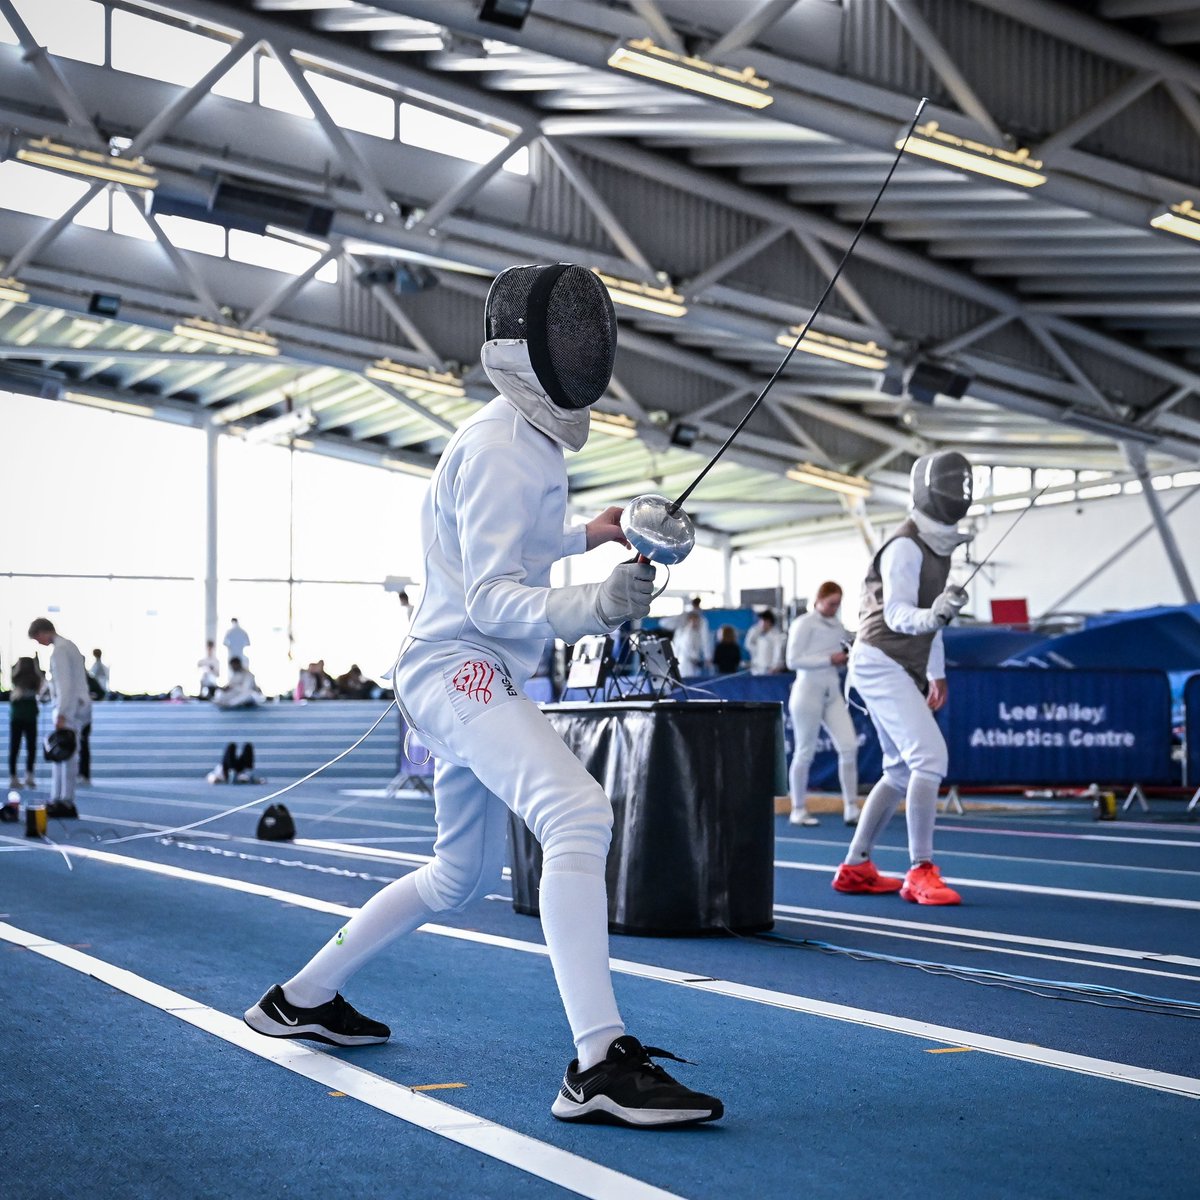 Good luck to year 10 student Alex who will be representing Great Britain in Budapest, Hungary this weekend at U17 Epee